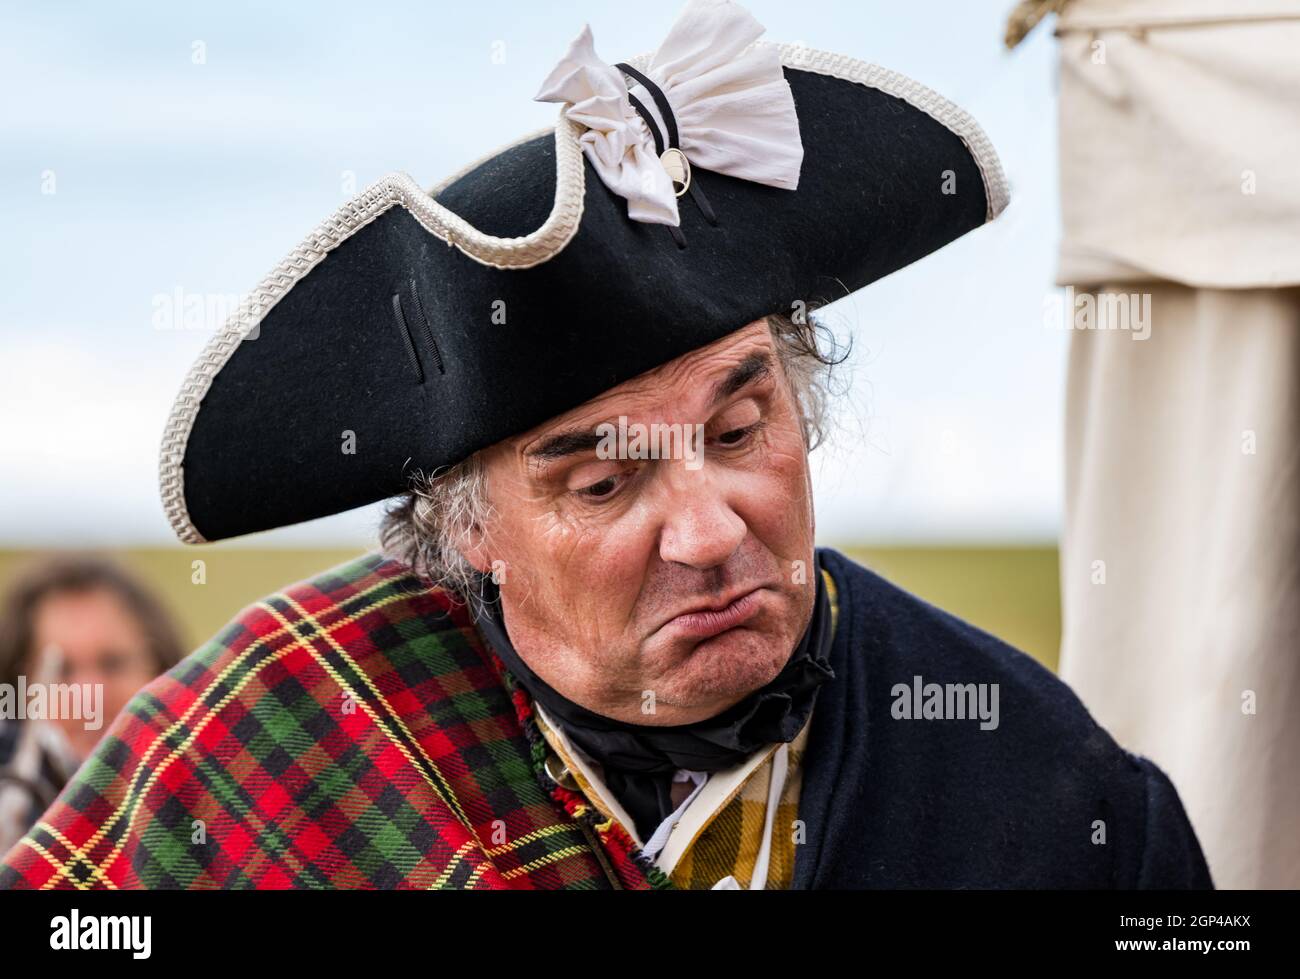 A Jacobite soldier in peripd costume with tricorne hat in re-enactment of Battle of Prestonpans, East Lothian, Scotland, UK Stock Photo